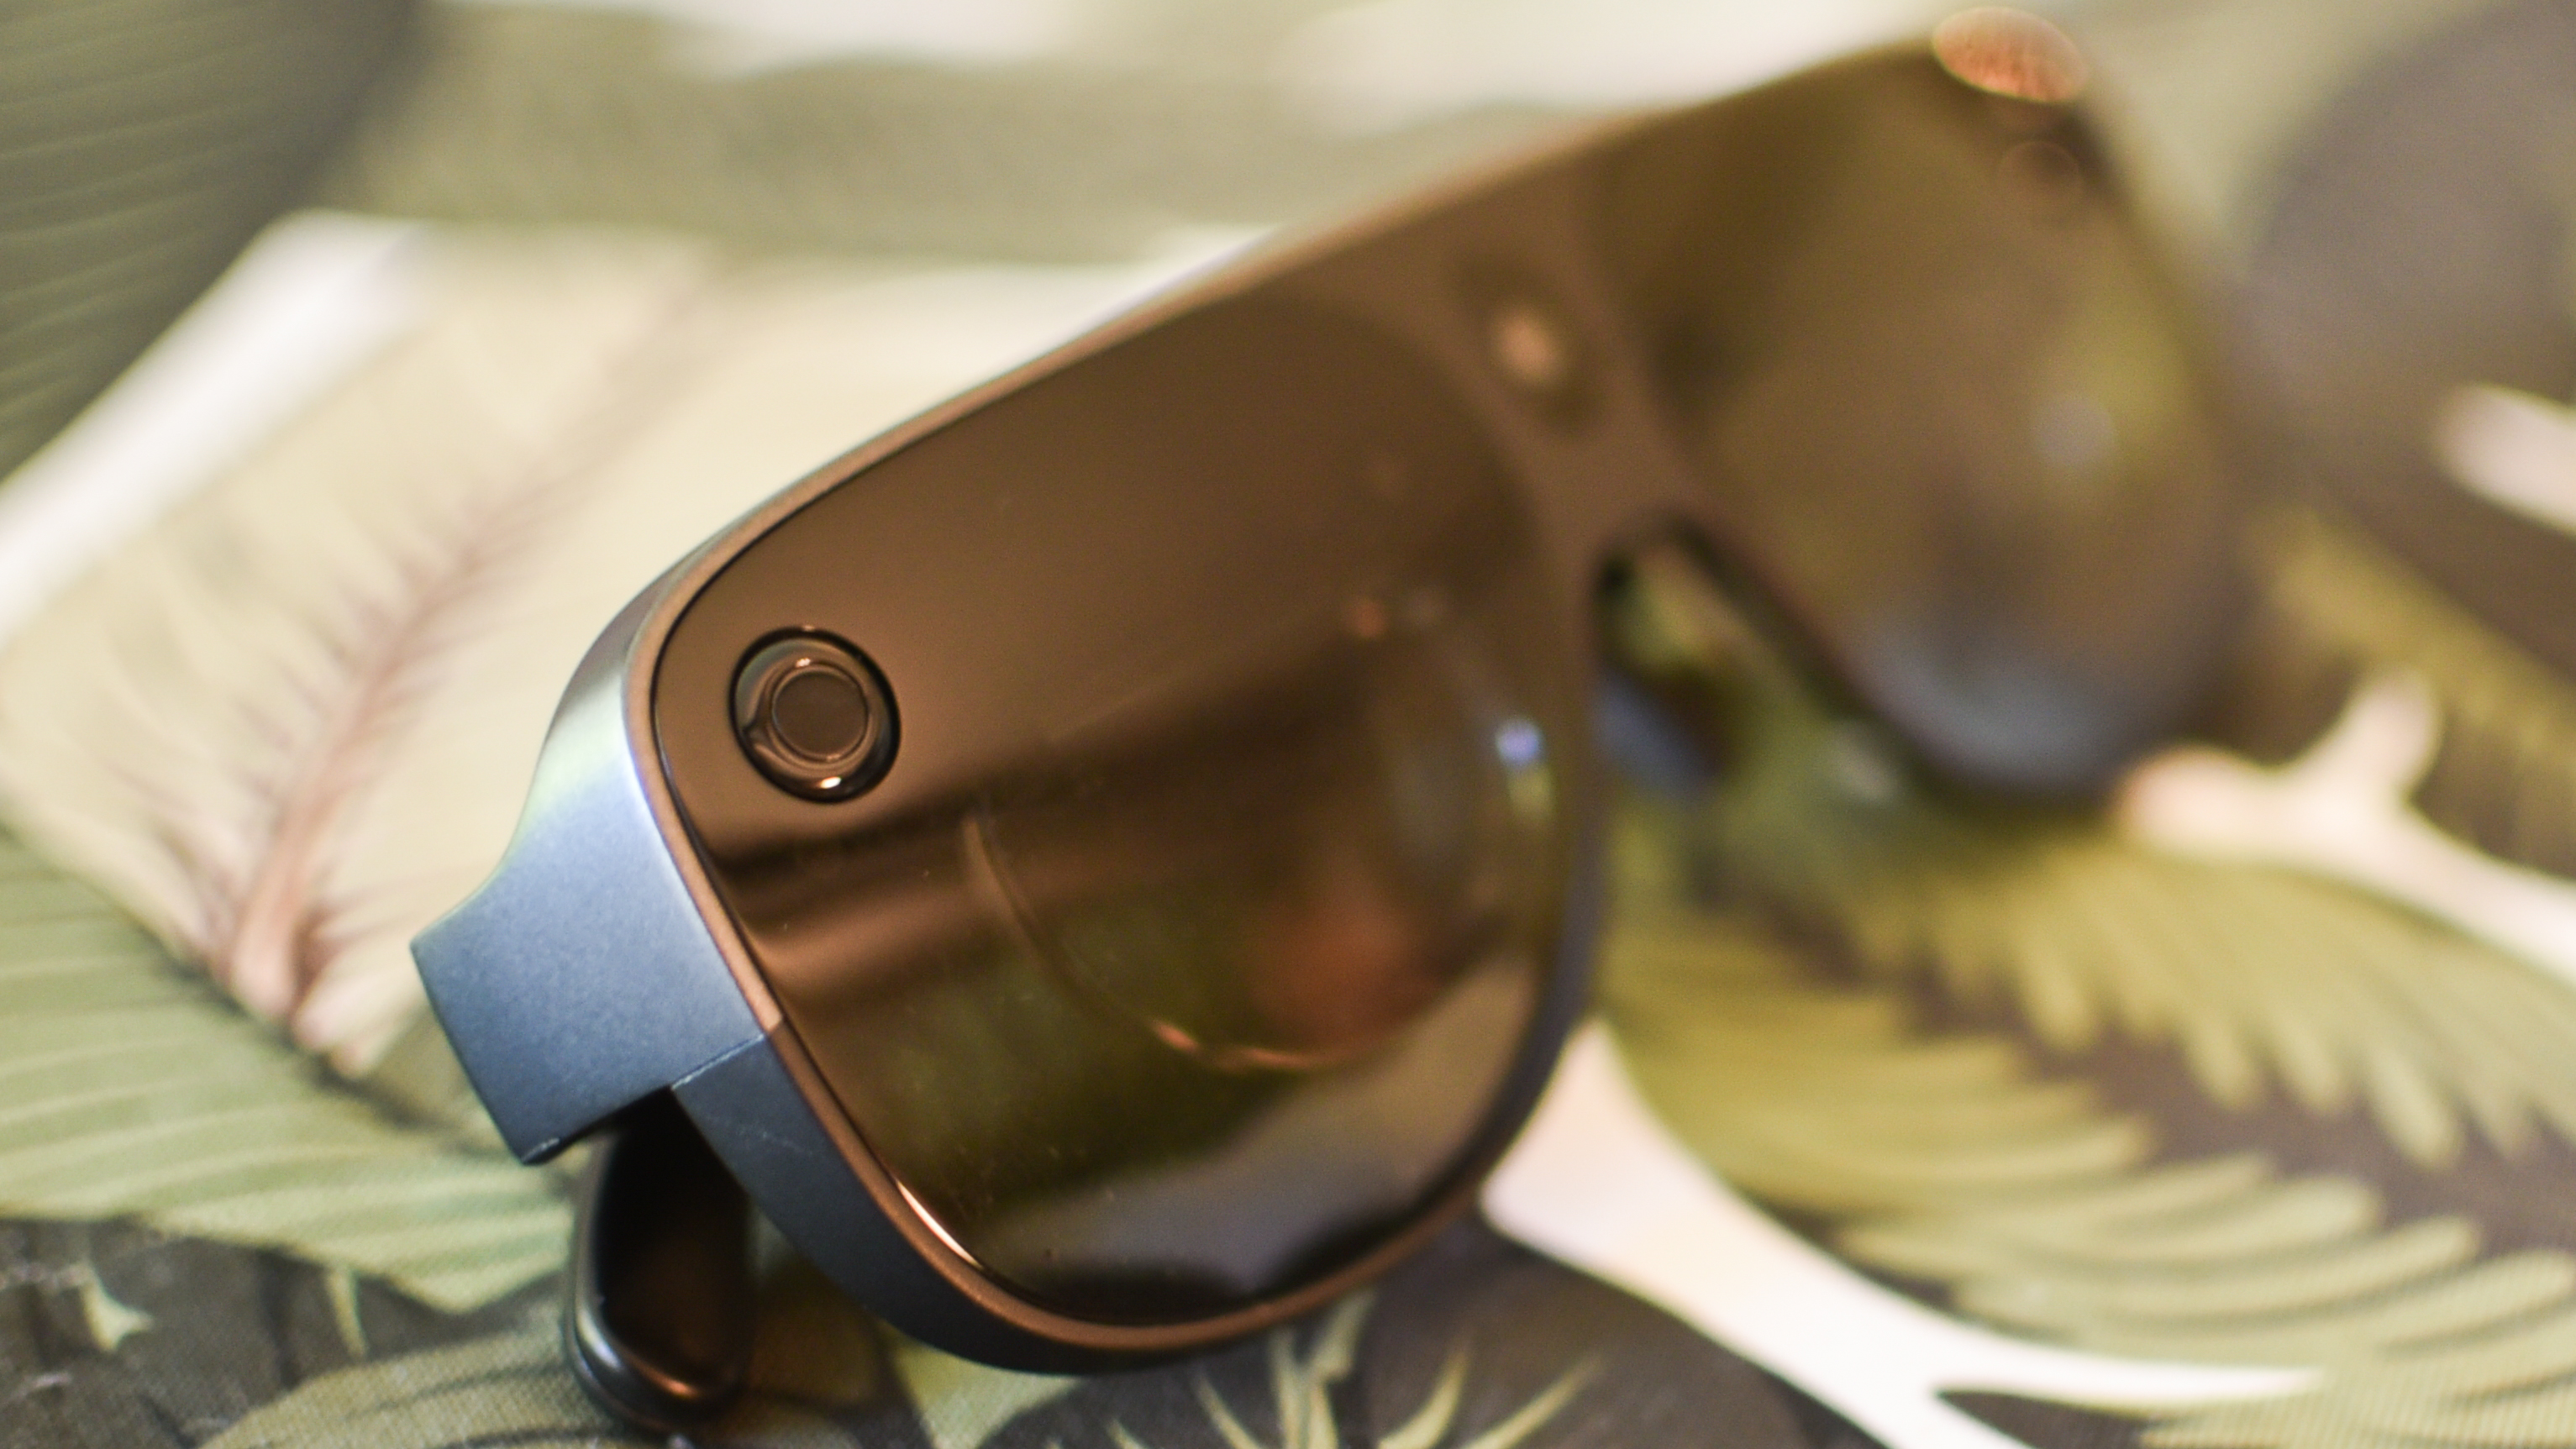 Qualcomm Snapdragon AR2 Gen 1 reference device glasses prototype